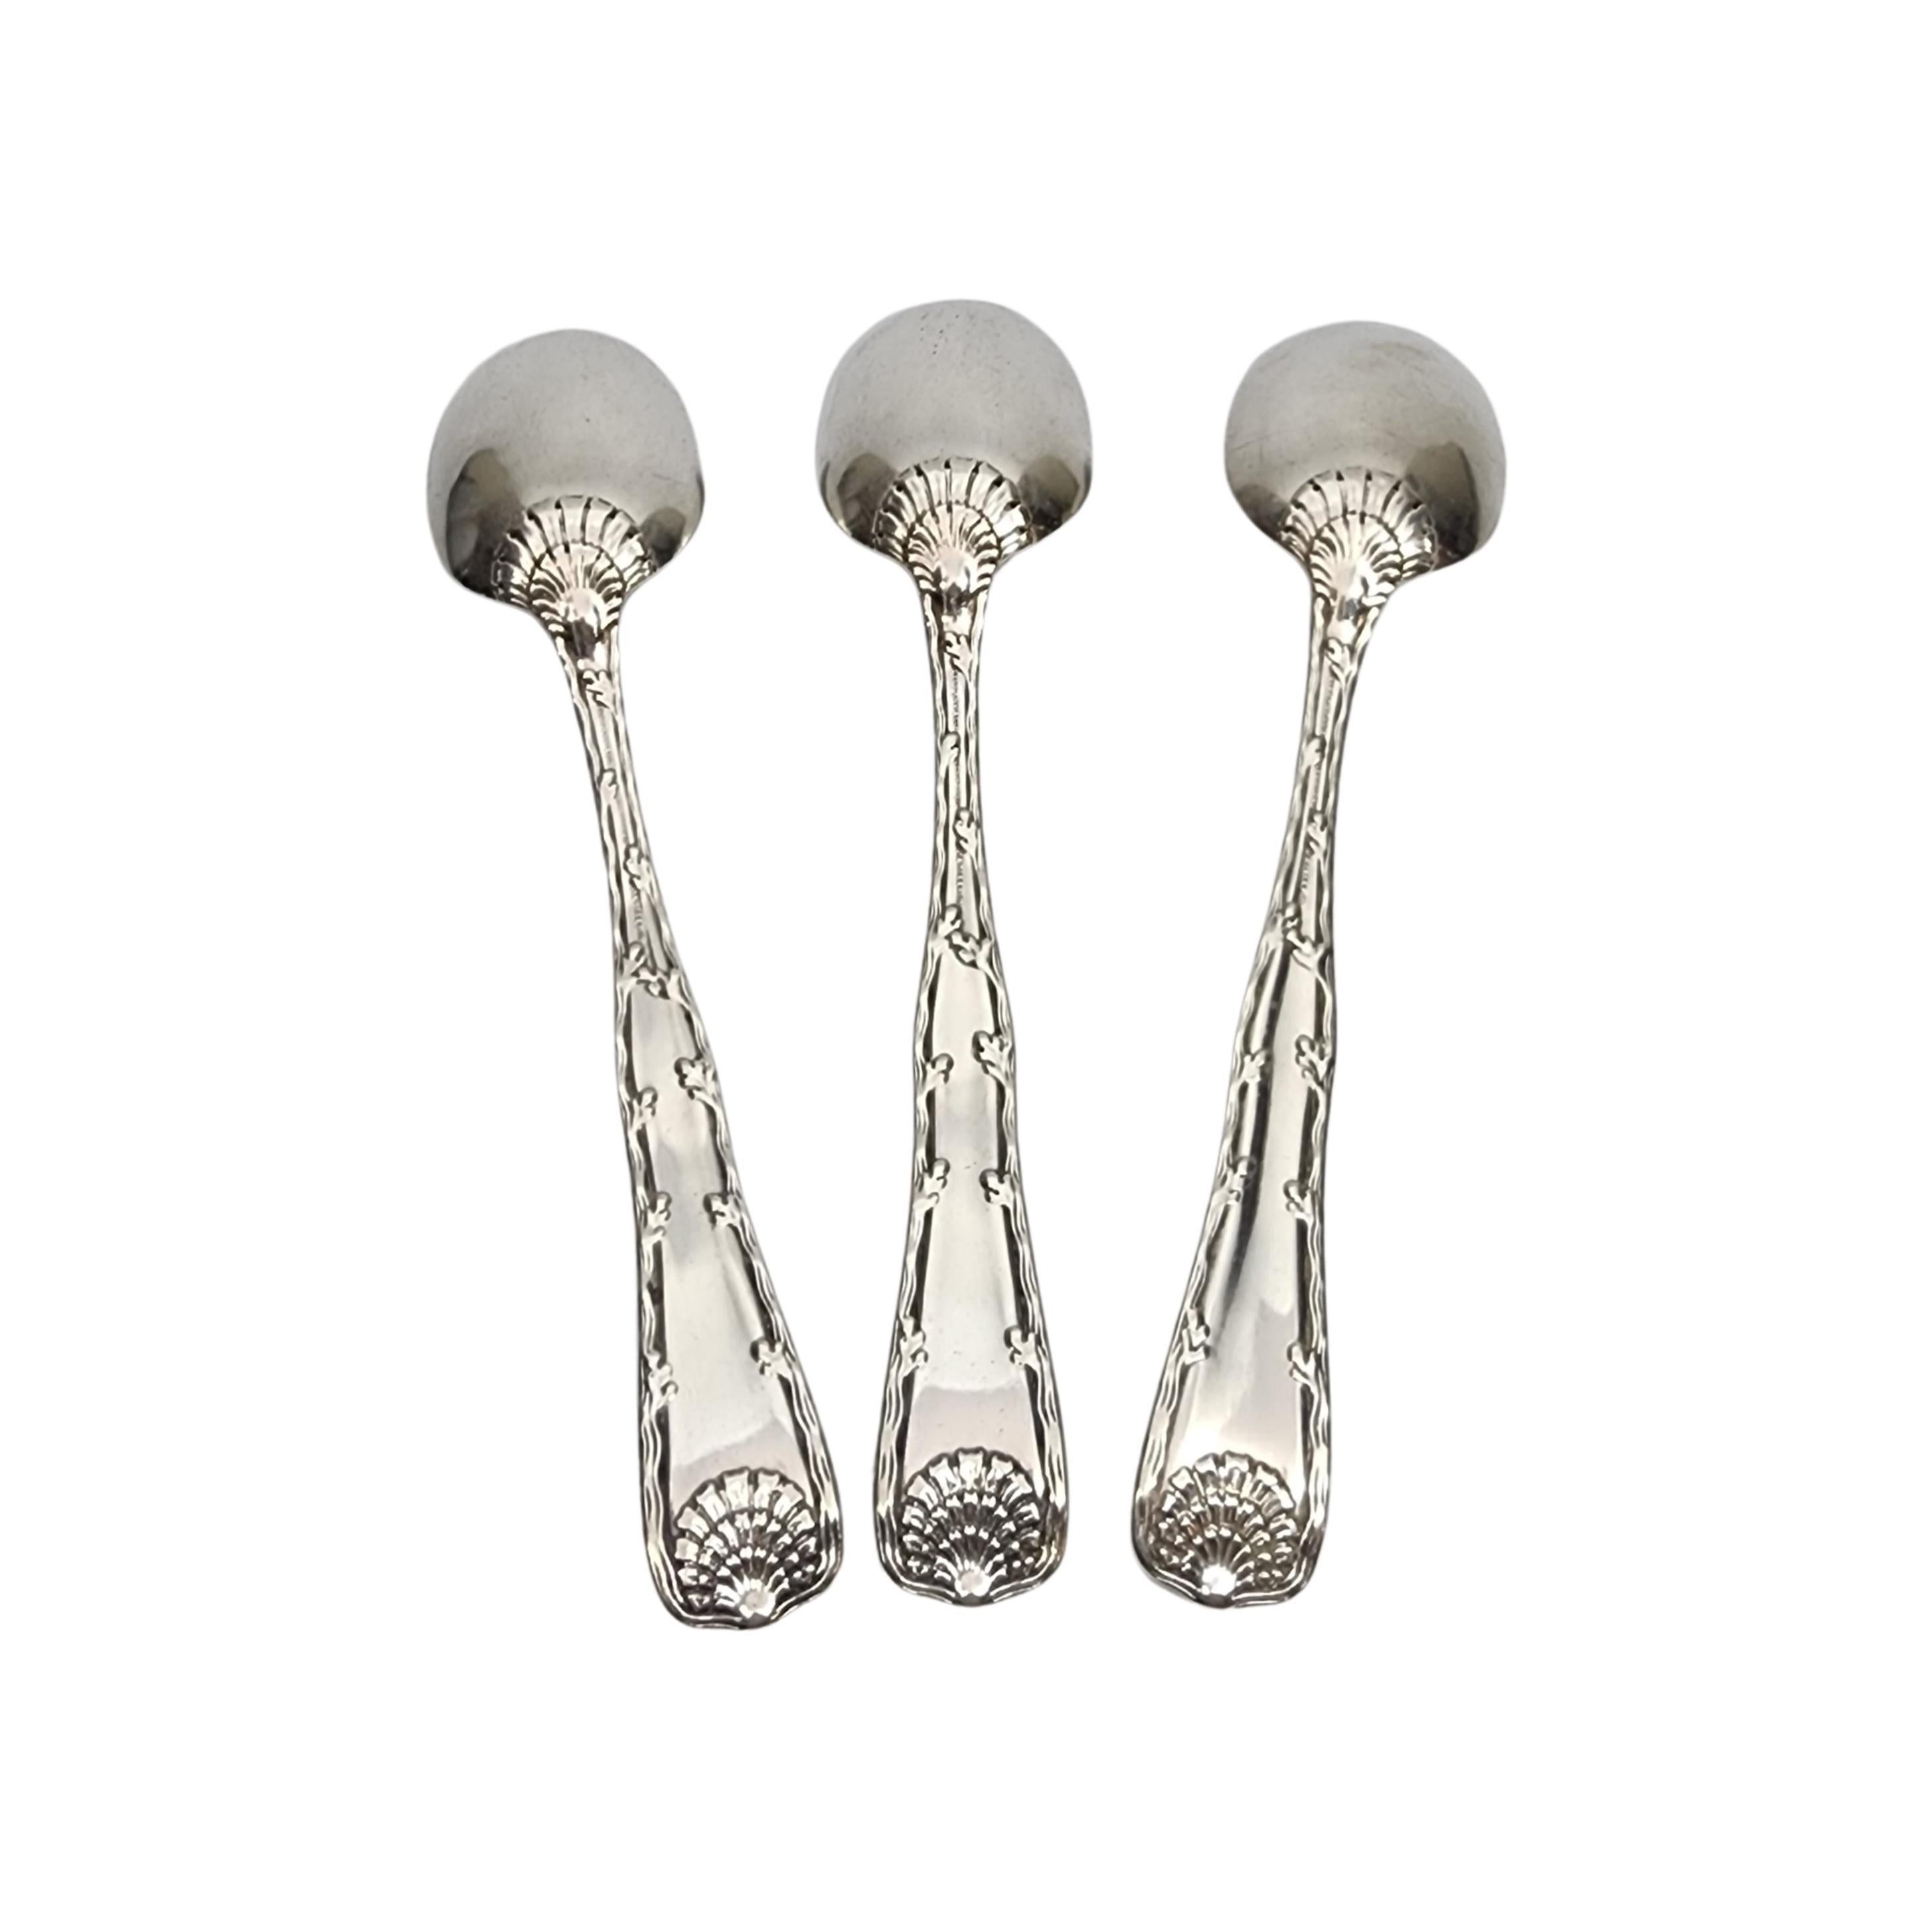 Set of 3 sterling silver serving tablespoons by Tiffany & Co in the Wave Edge pattern.

No monogram

These large spoons are in the Wave Edge pattern, a marine motif designed by Charles T. Grosjean. Hallmarks date pieces to manufacture under the